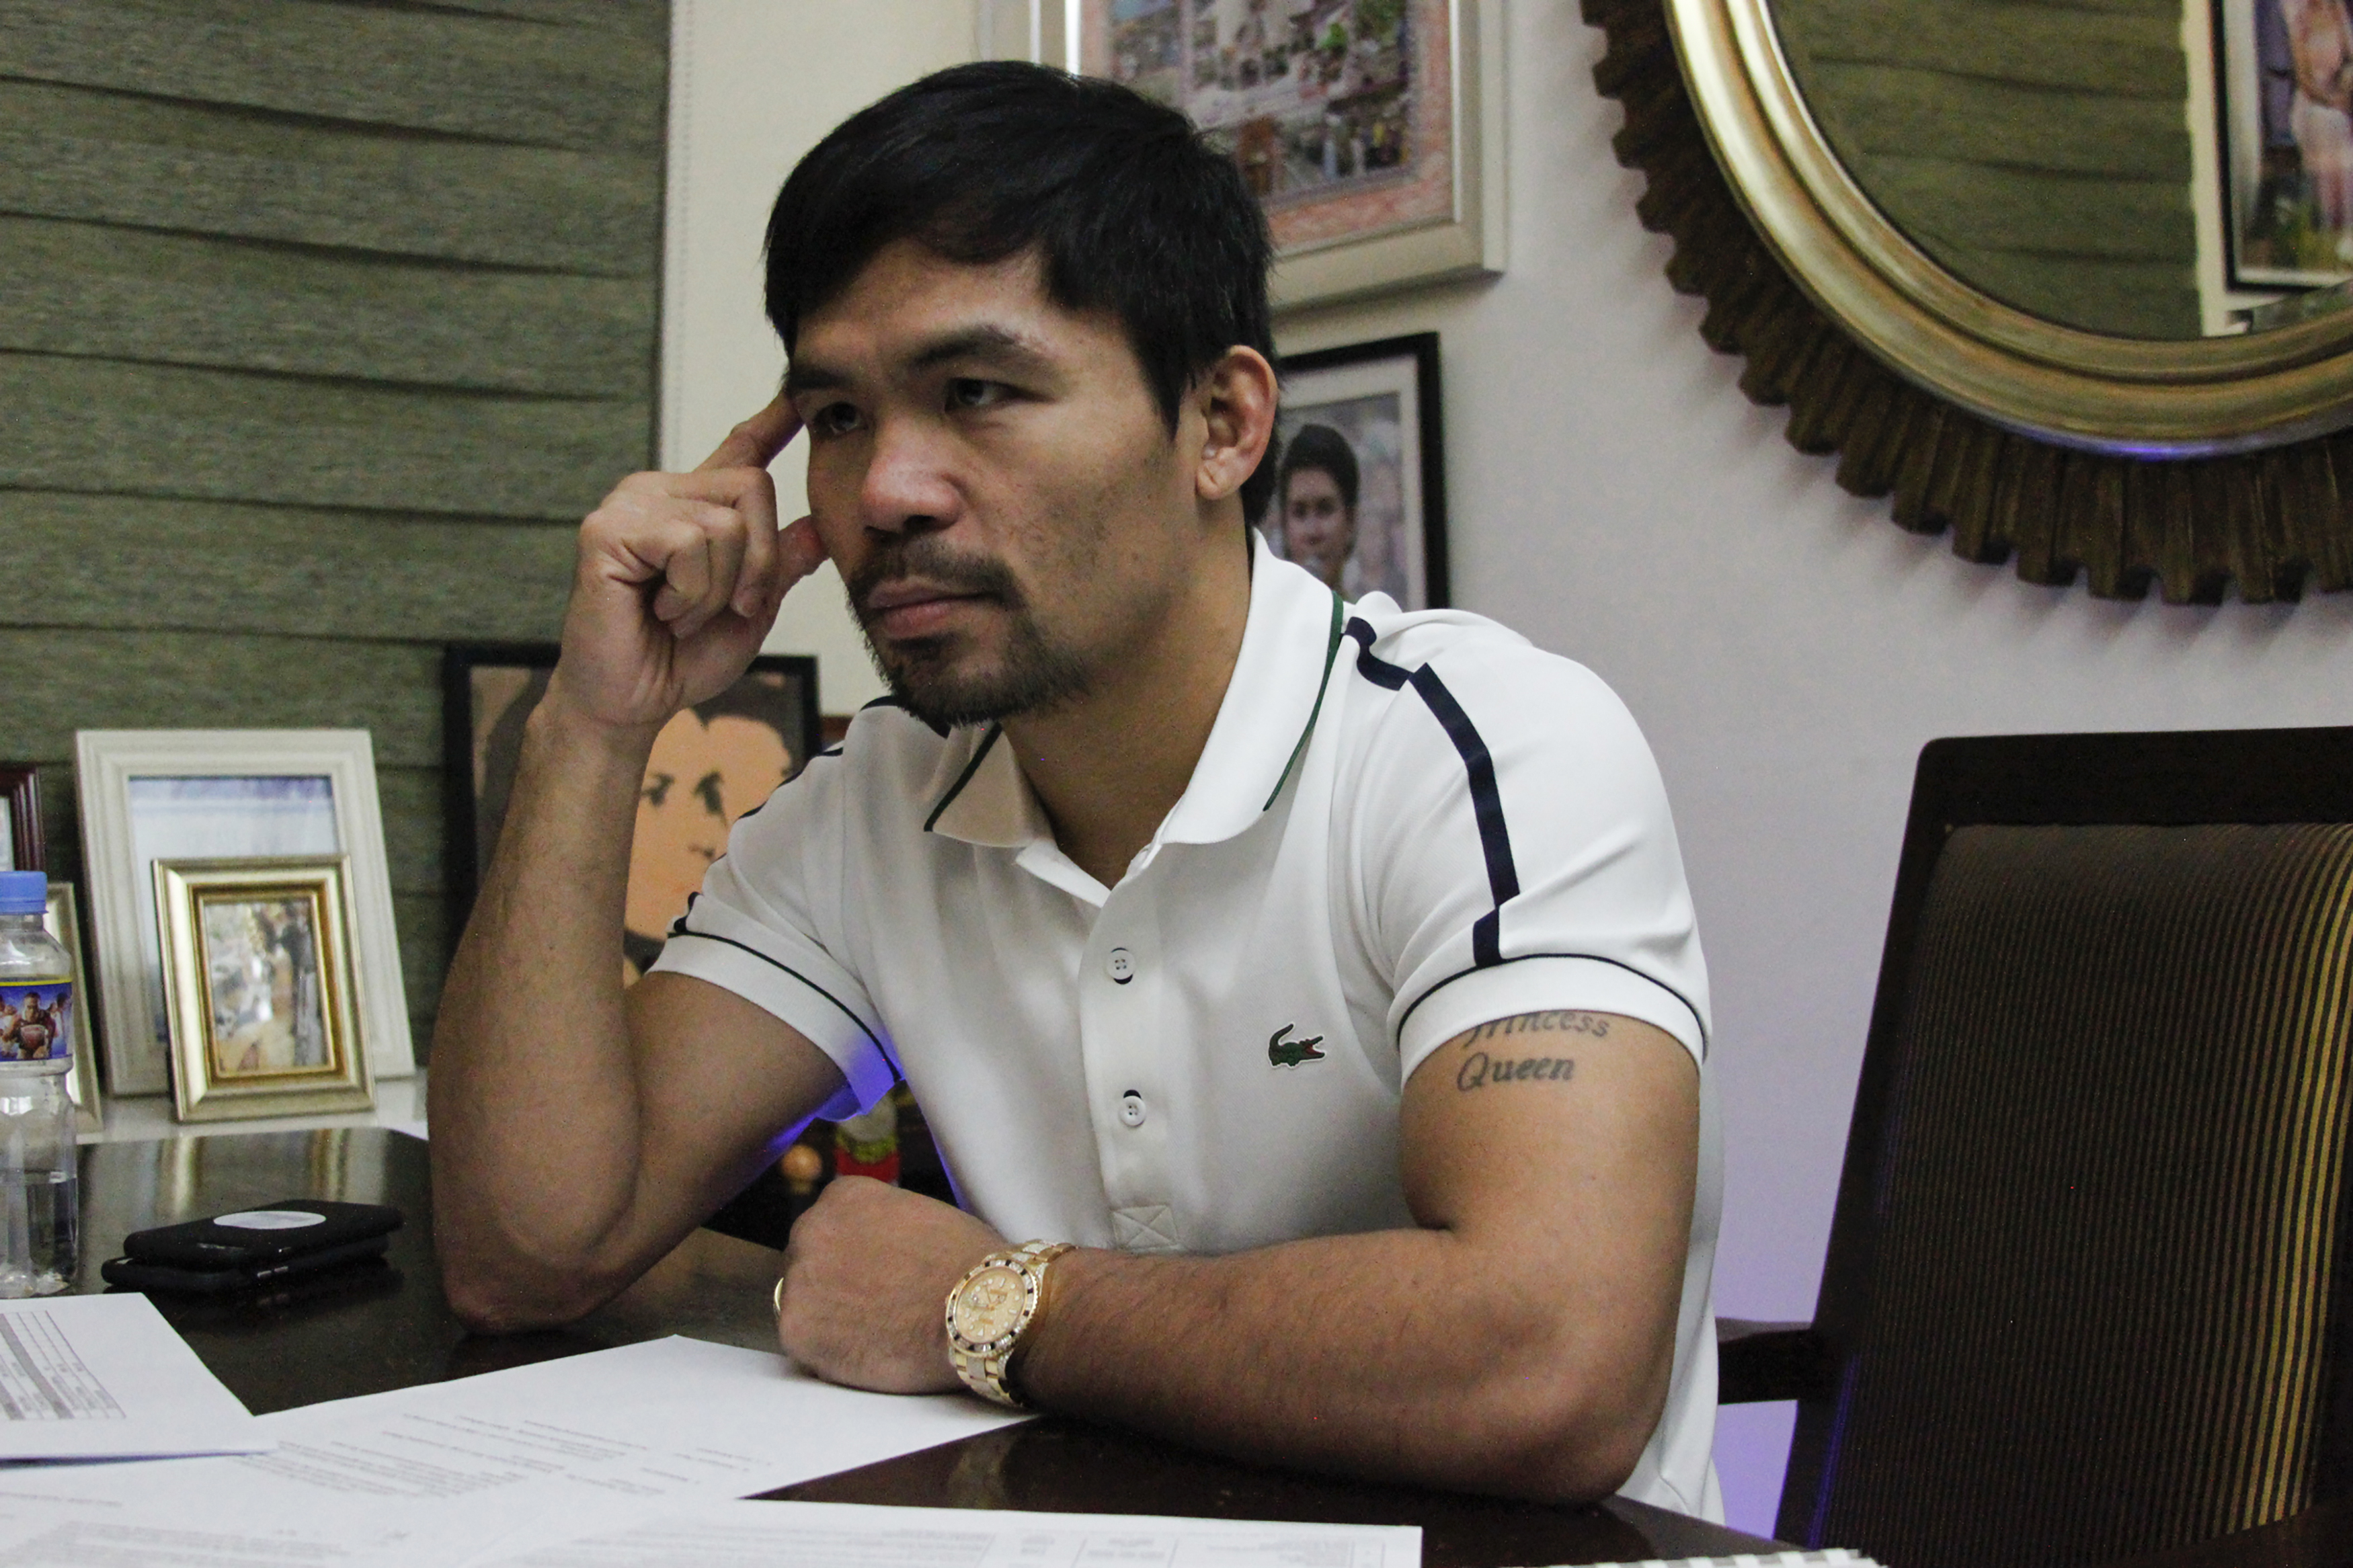 In this picture taken on July 13, 2016, Philippine boxing icon Manny Pacquiao gestures during a media interview at his residence in General Santos City, on the southern island of Mindanao. Pacquiao has declared he still has the passion for the sport and may come out of retirement, although there are no plans for a fight this year. / AFP PHOTO / Aquiles ZONIO